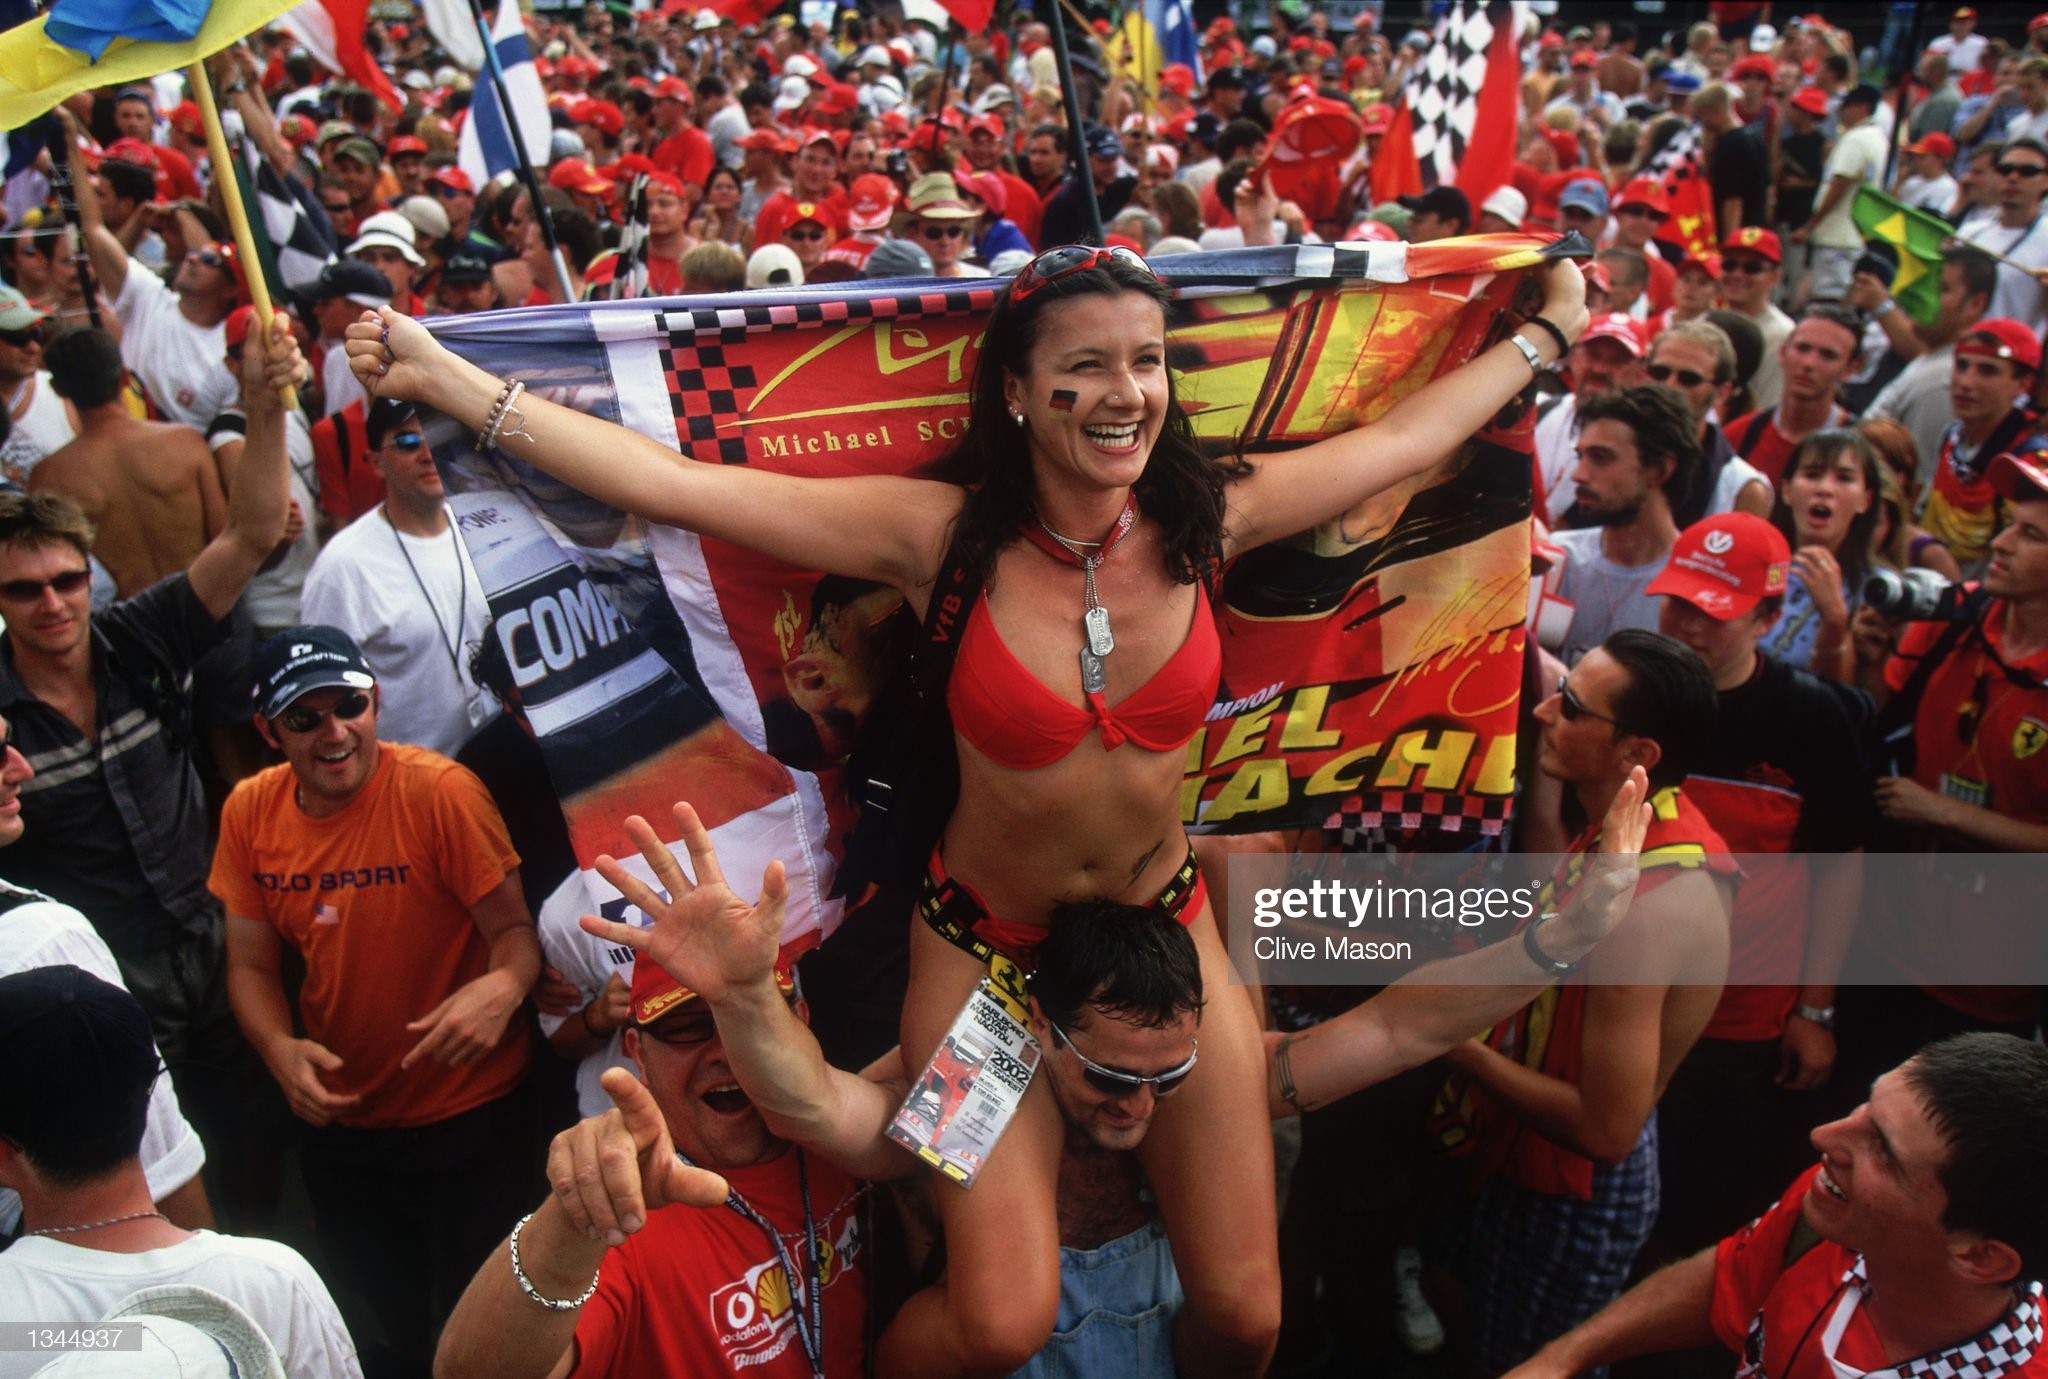 The Ferrari tifosi add some glamour to the post race celebration during the Formula One Hungarian Grand Prix held at the Hungaroring Circuit, Budapest, Hungary, on the 18th of August 2002.